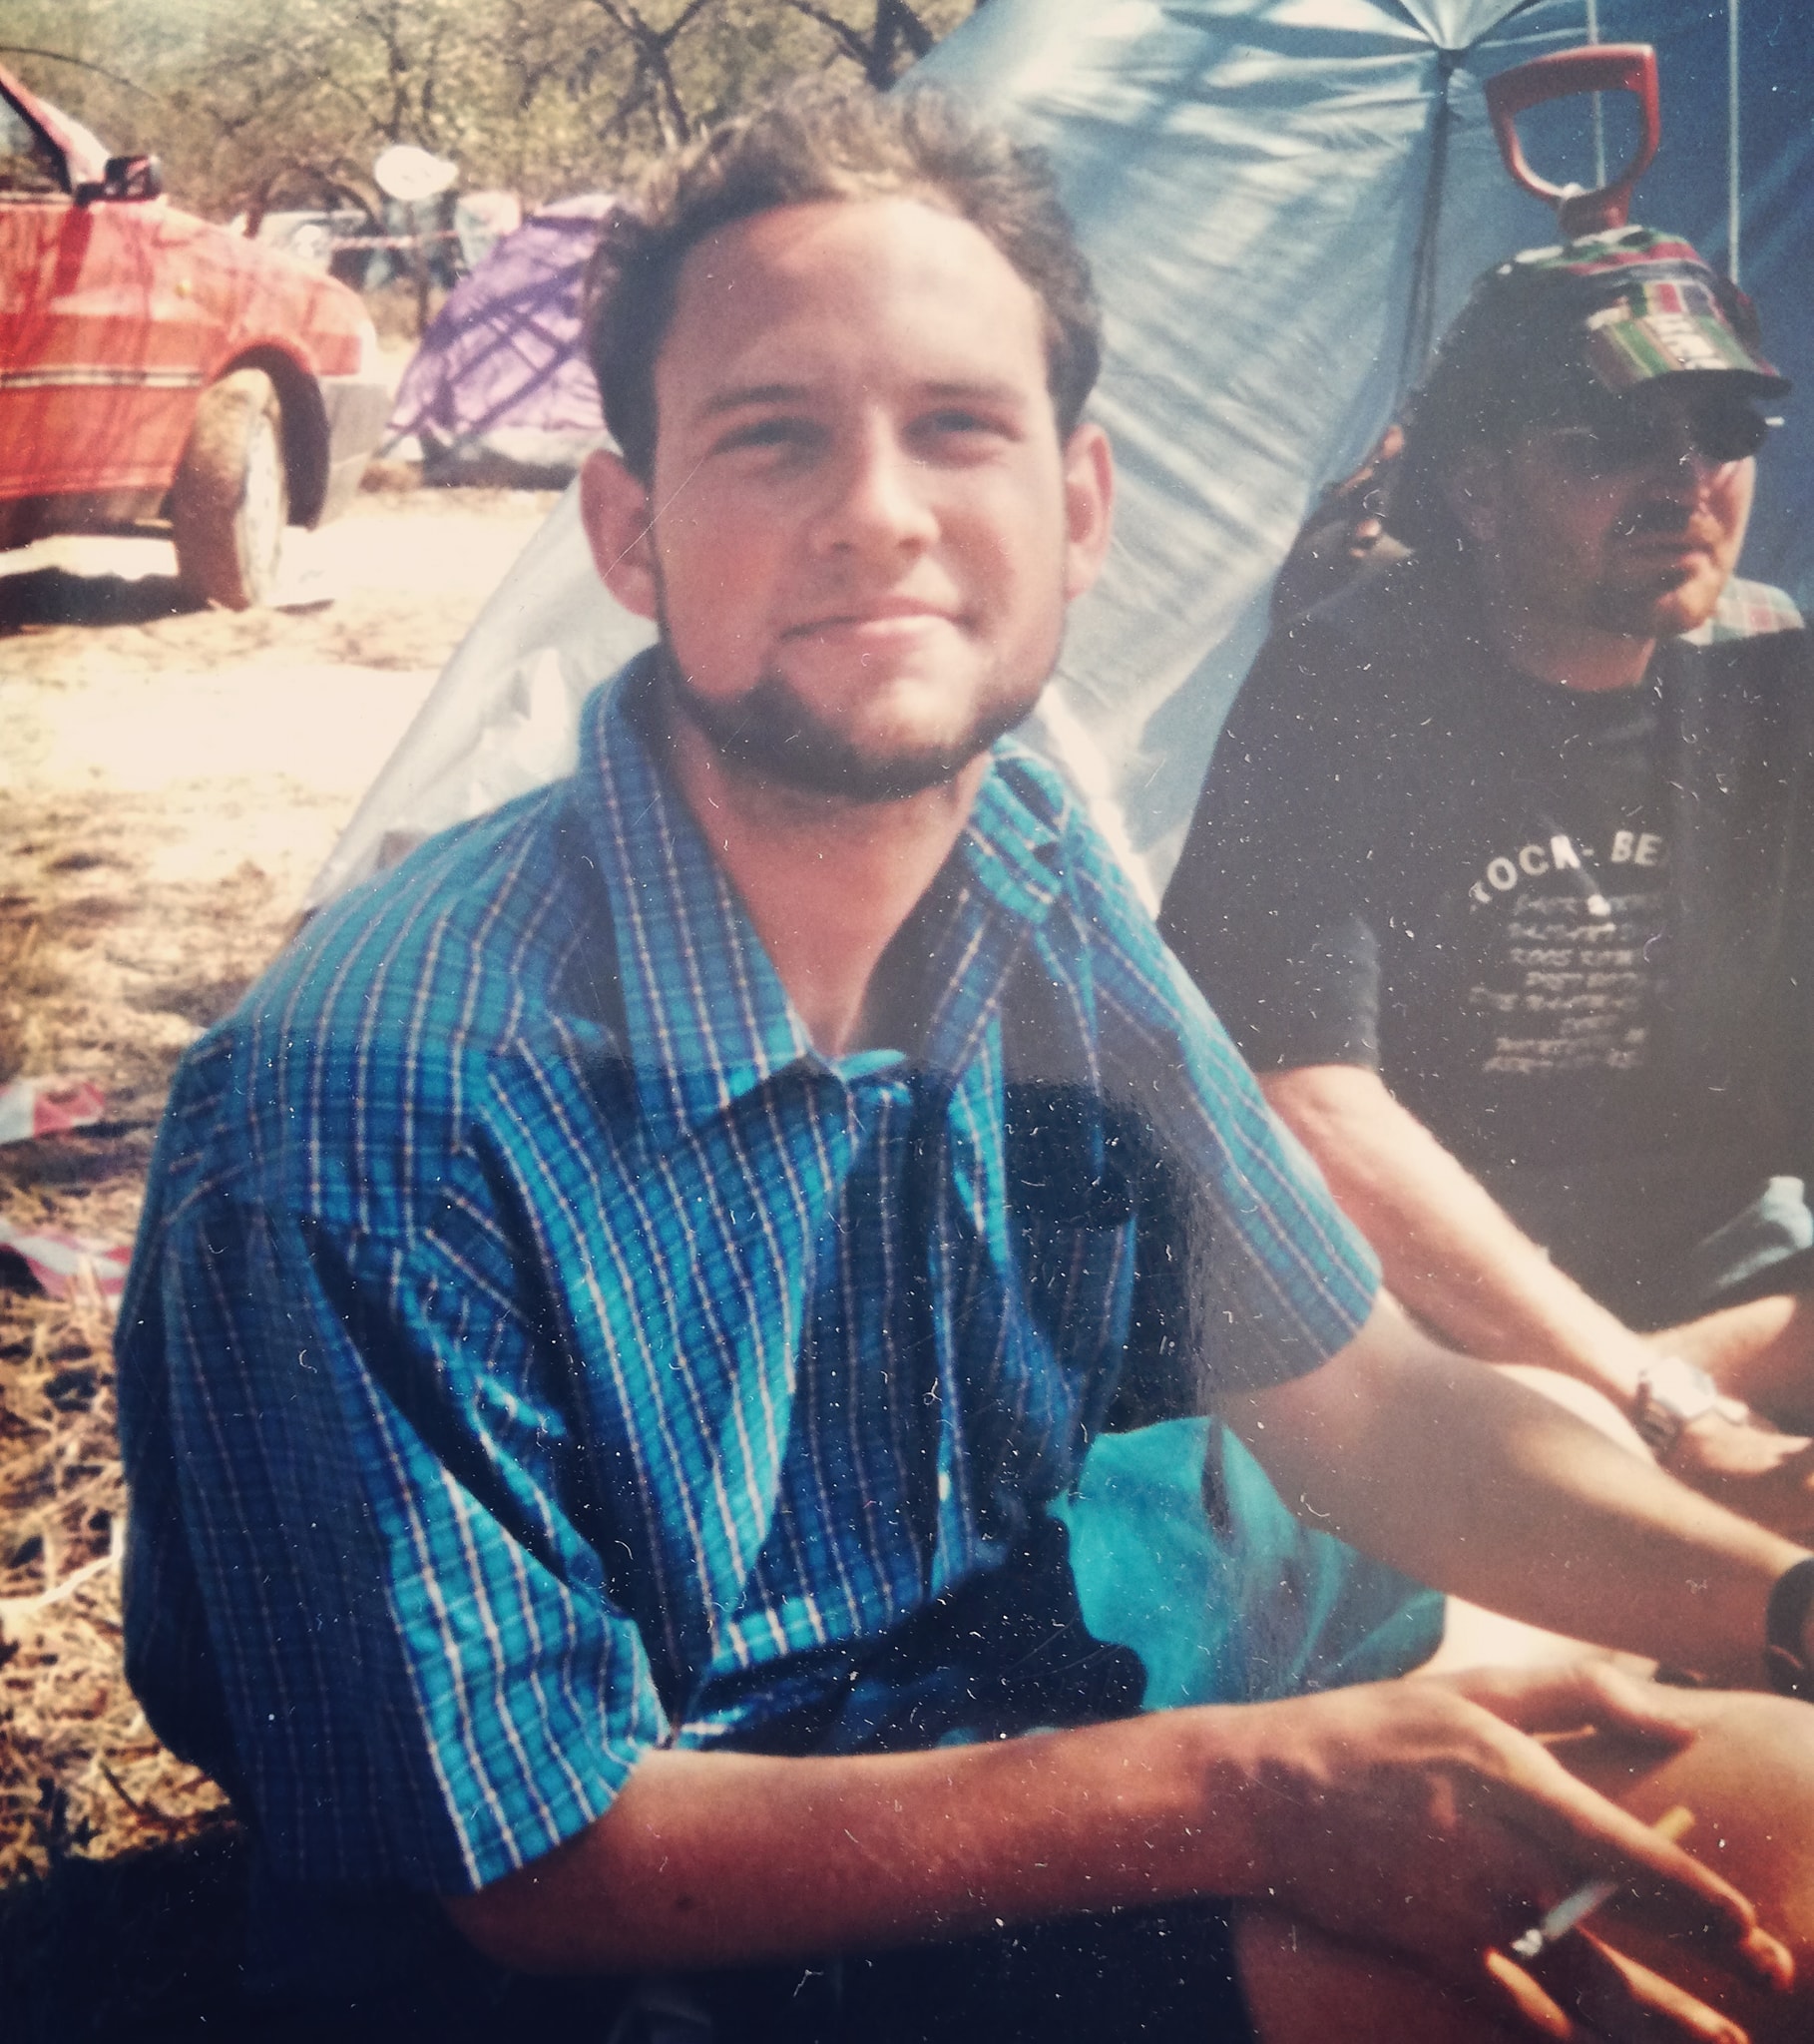 Me at My First Oppikoppi in 1998